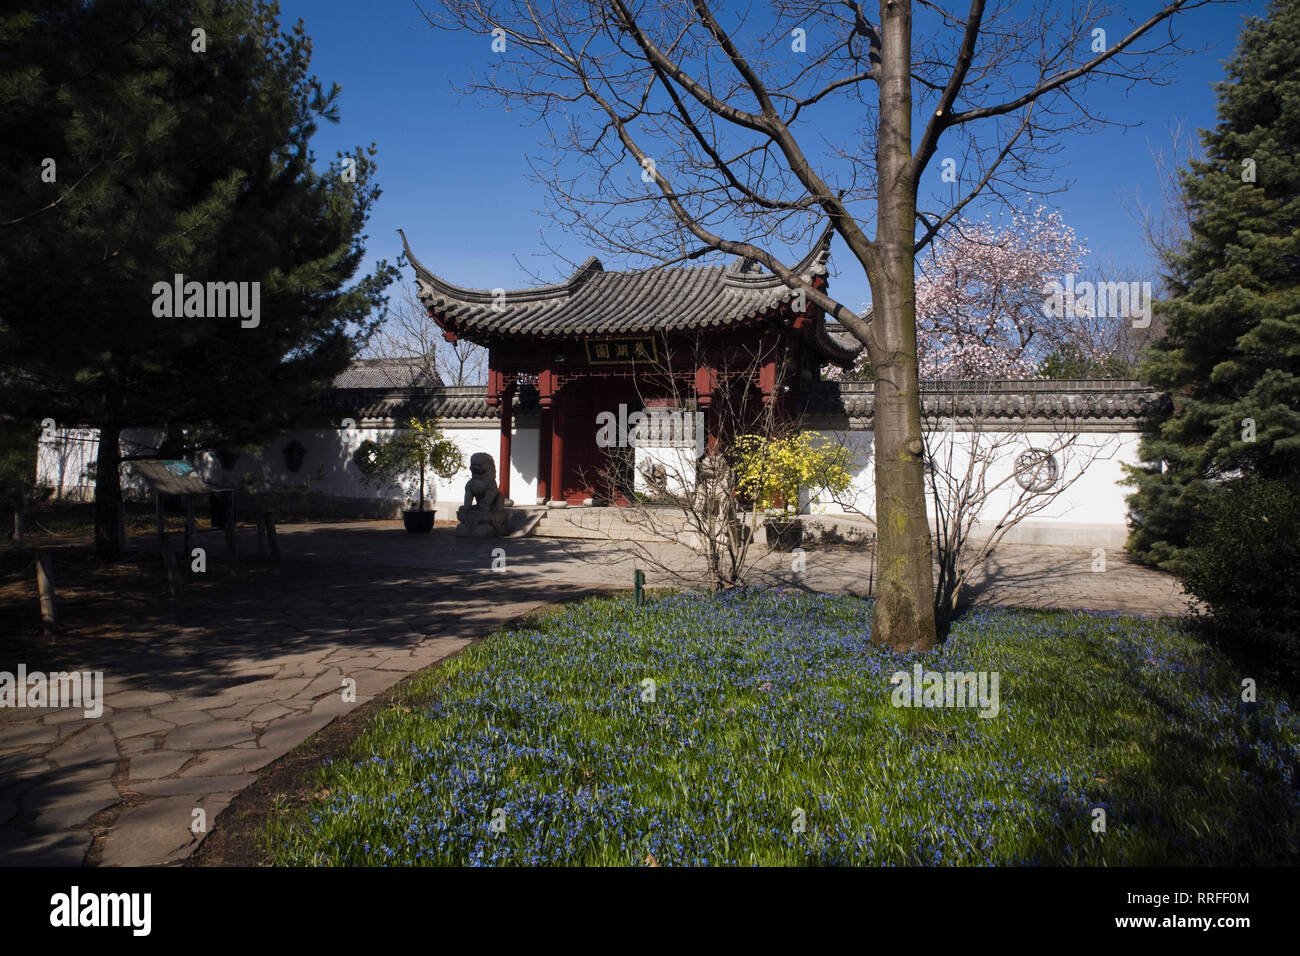 Wall with gate leading to springtime Courtyard in Dream Lake Garden at the Chinese Garden in spring, Montreal Botanical Garden, Quebec, Canada Stock Photo